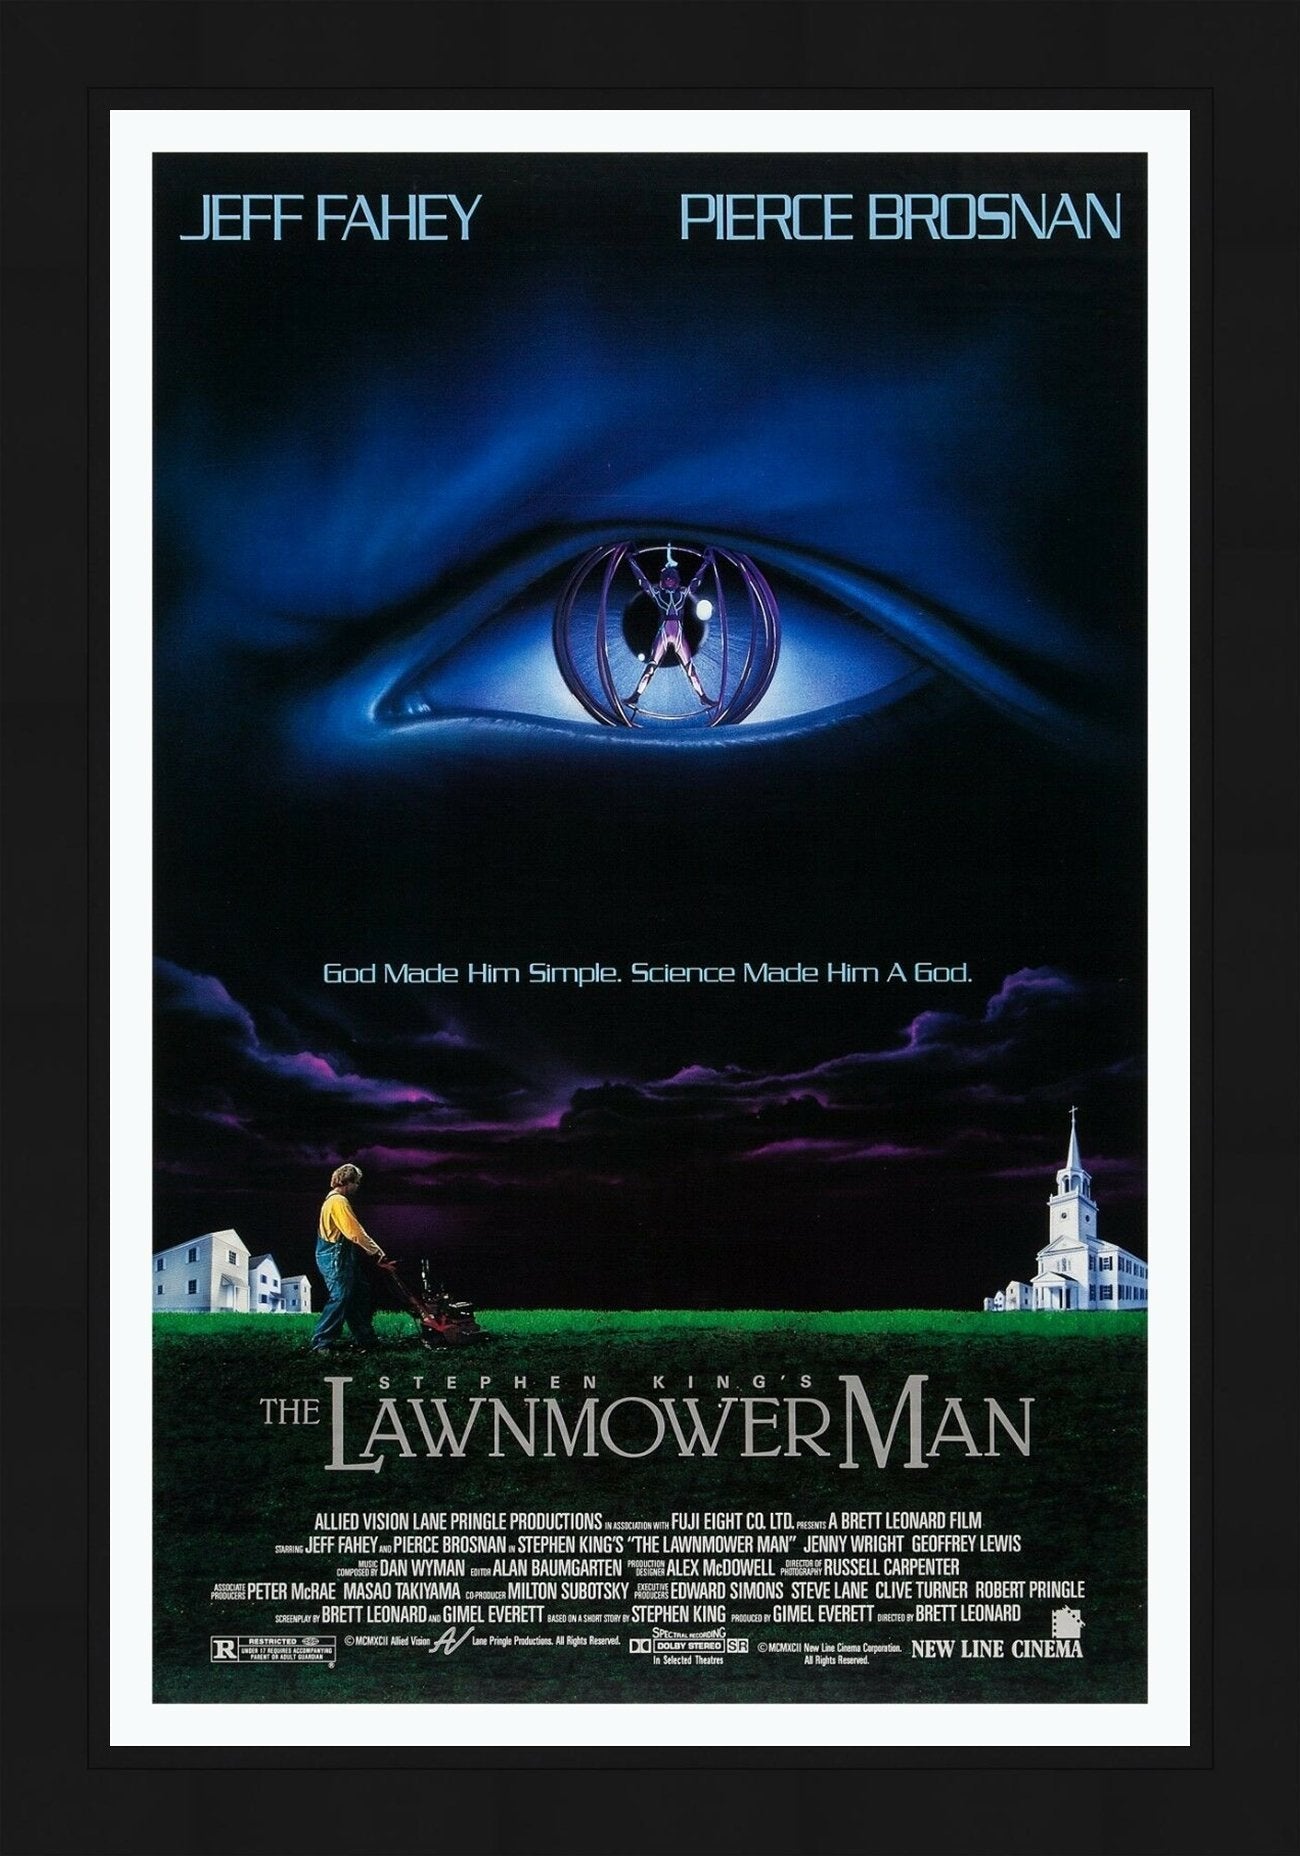 An original movie poster for the film The Lawnmover Man